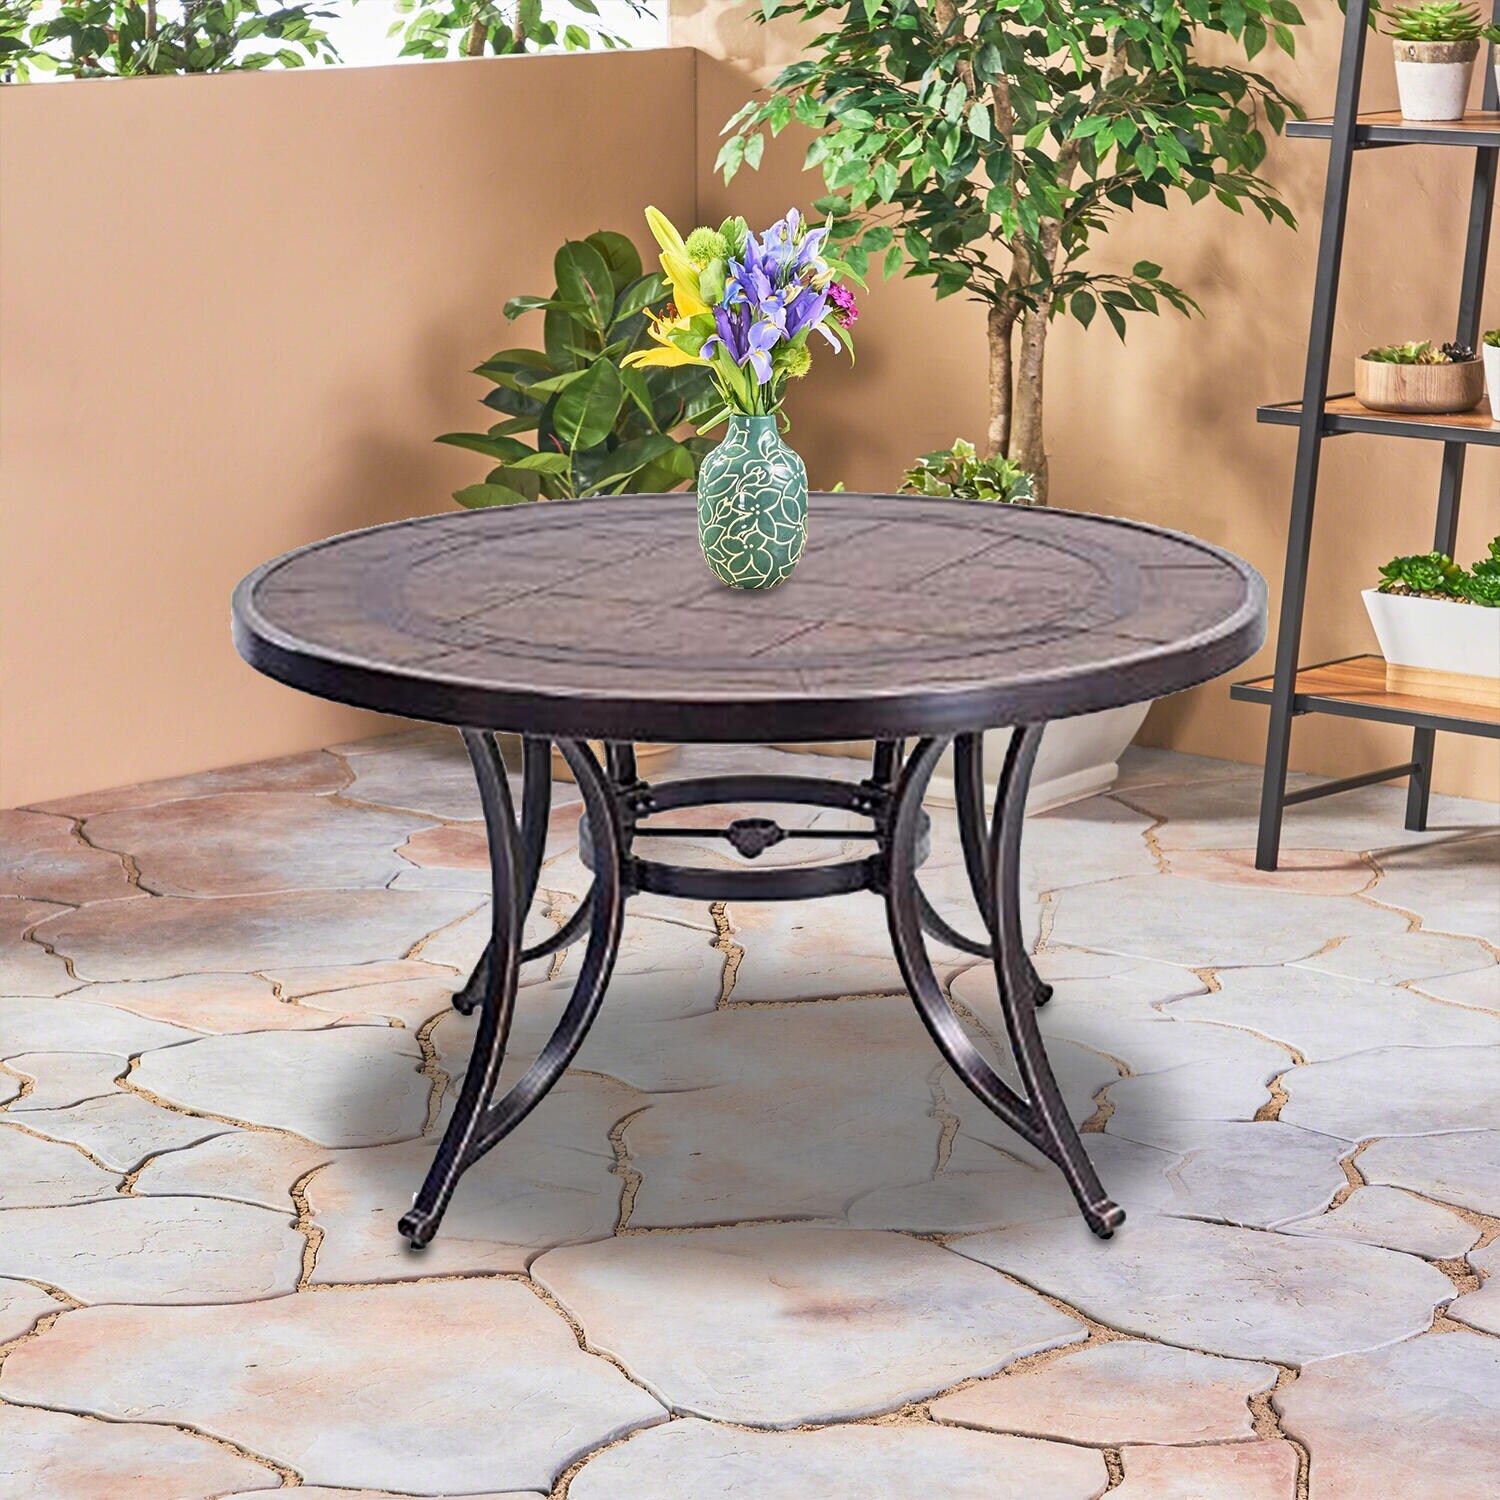 Mondawe Round Outdoor Dining Table 48 In W X 48 In L In The Patio